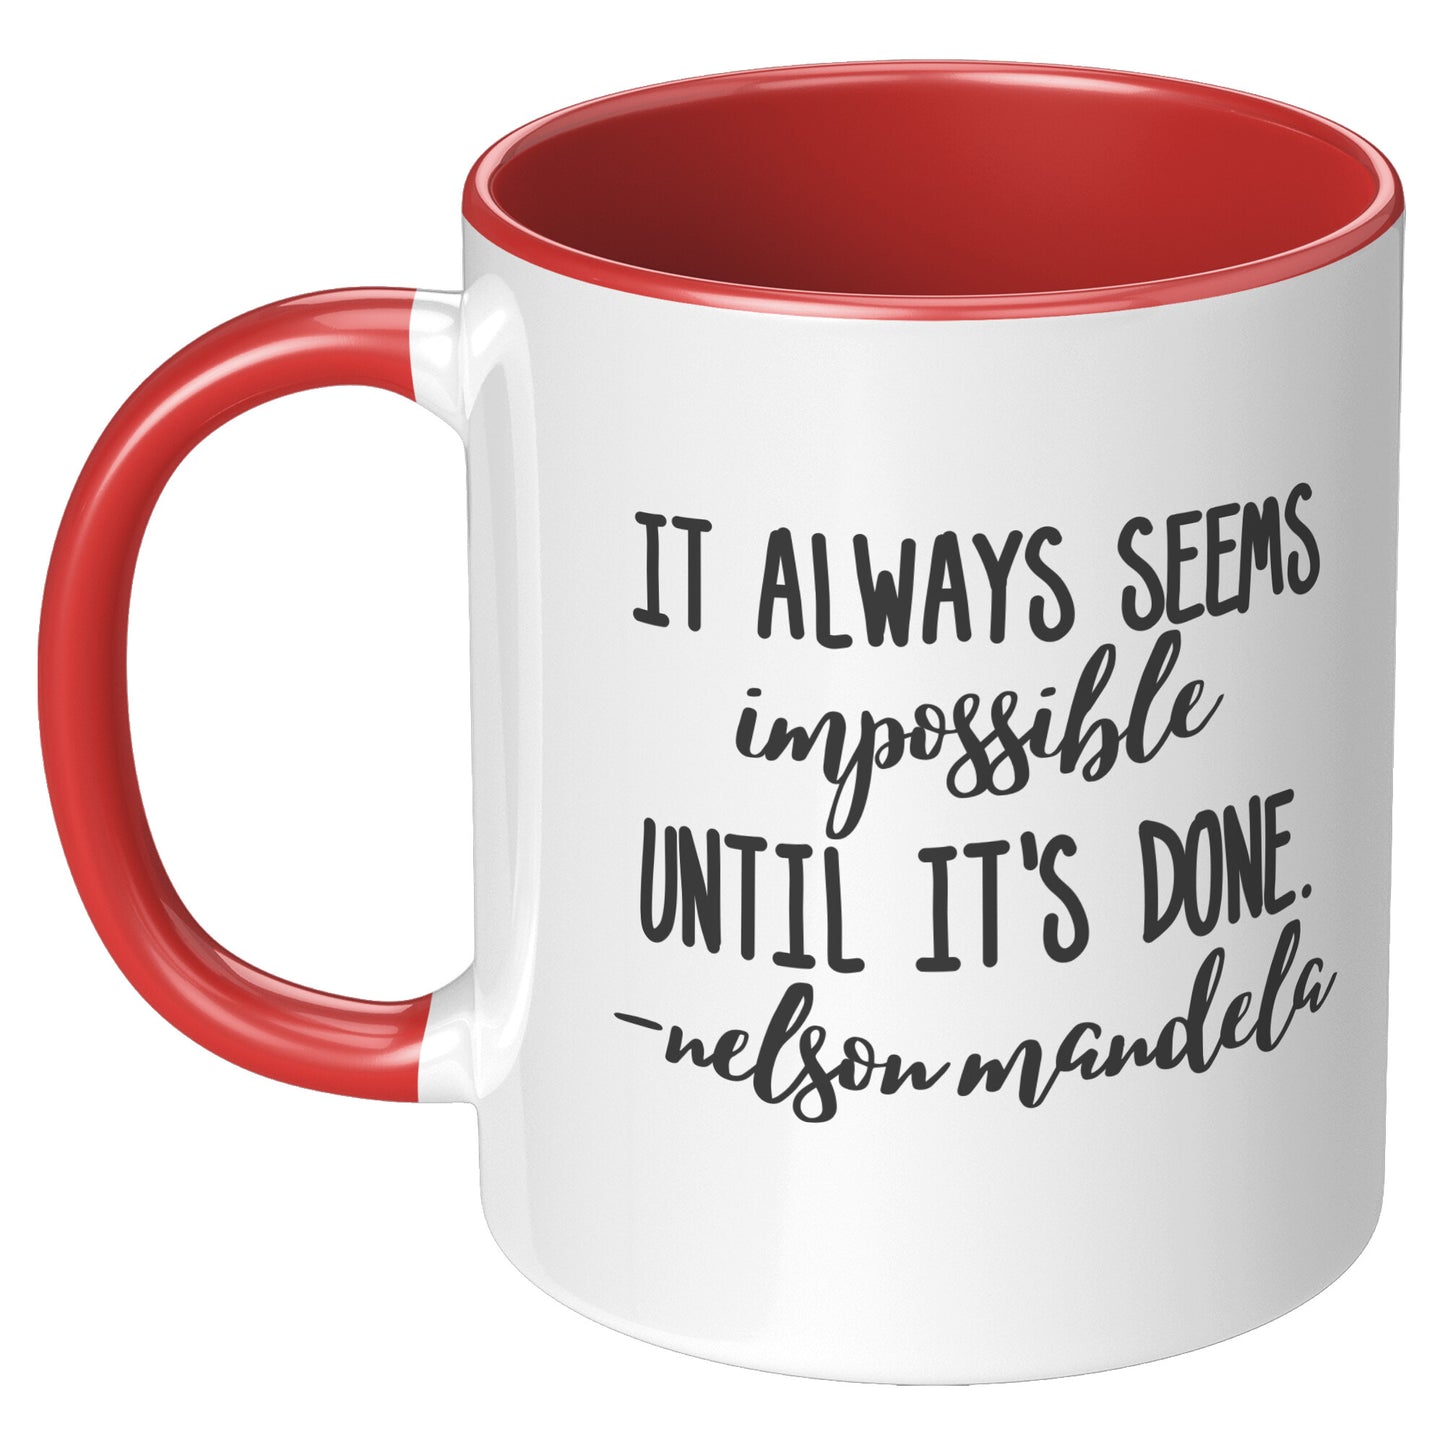 Coffee Mug with Quote, "It Always Seems Impossible Until It's Done."